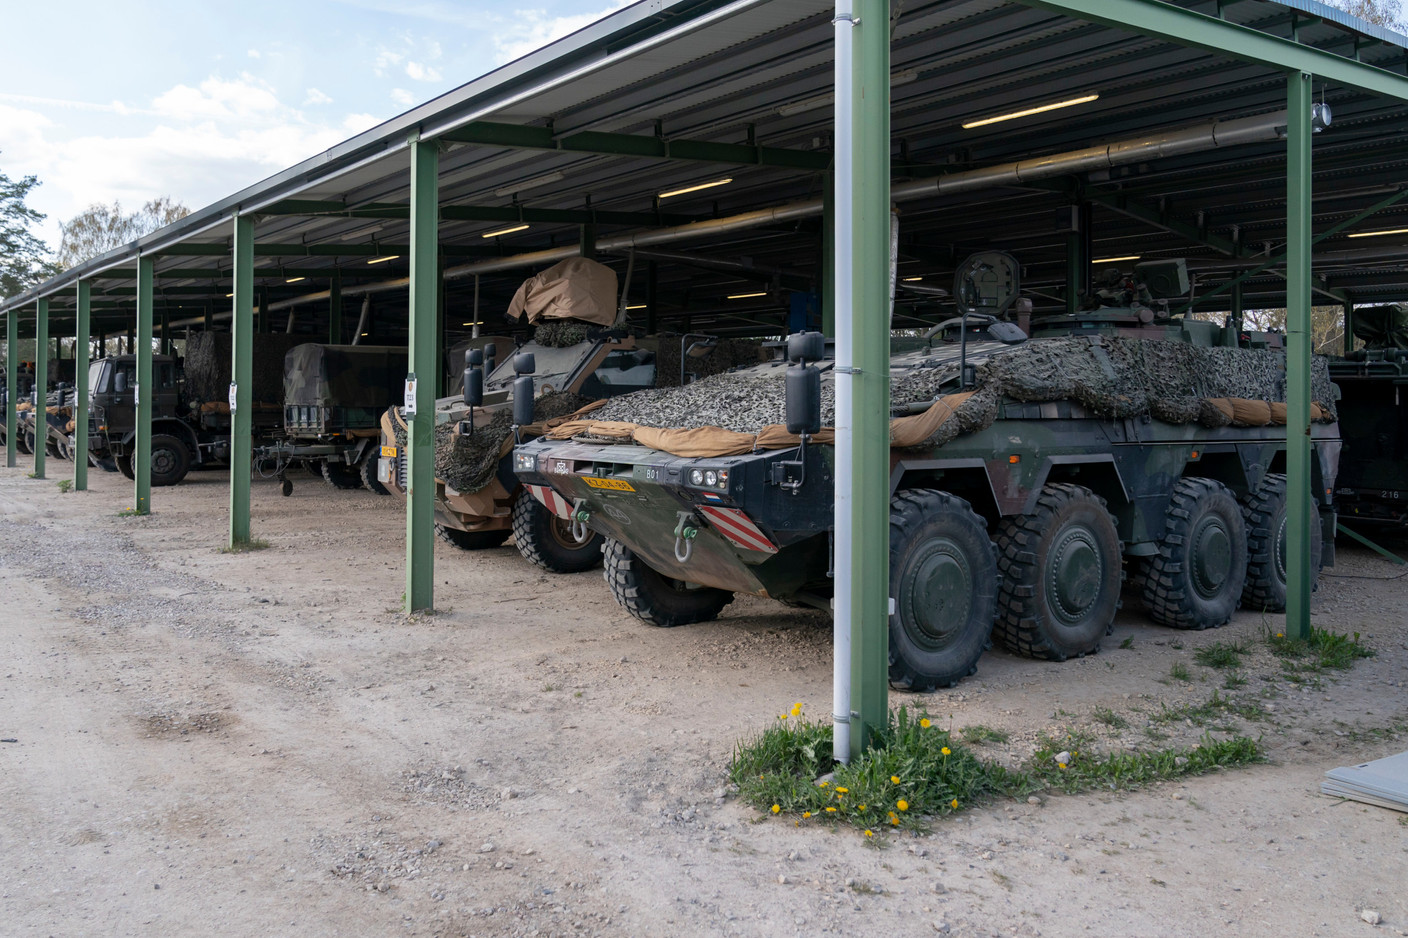 Numerous tanks, stationed at the Rukla base, which hosts Nato soldiers in the framework of the EFP. (Photo: Emmanuel Claude/SIP)